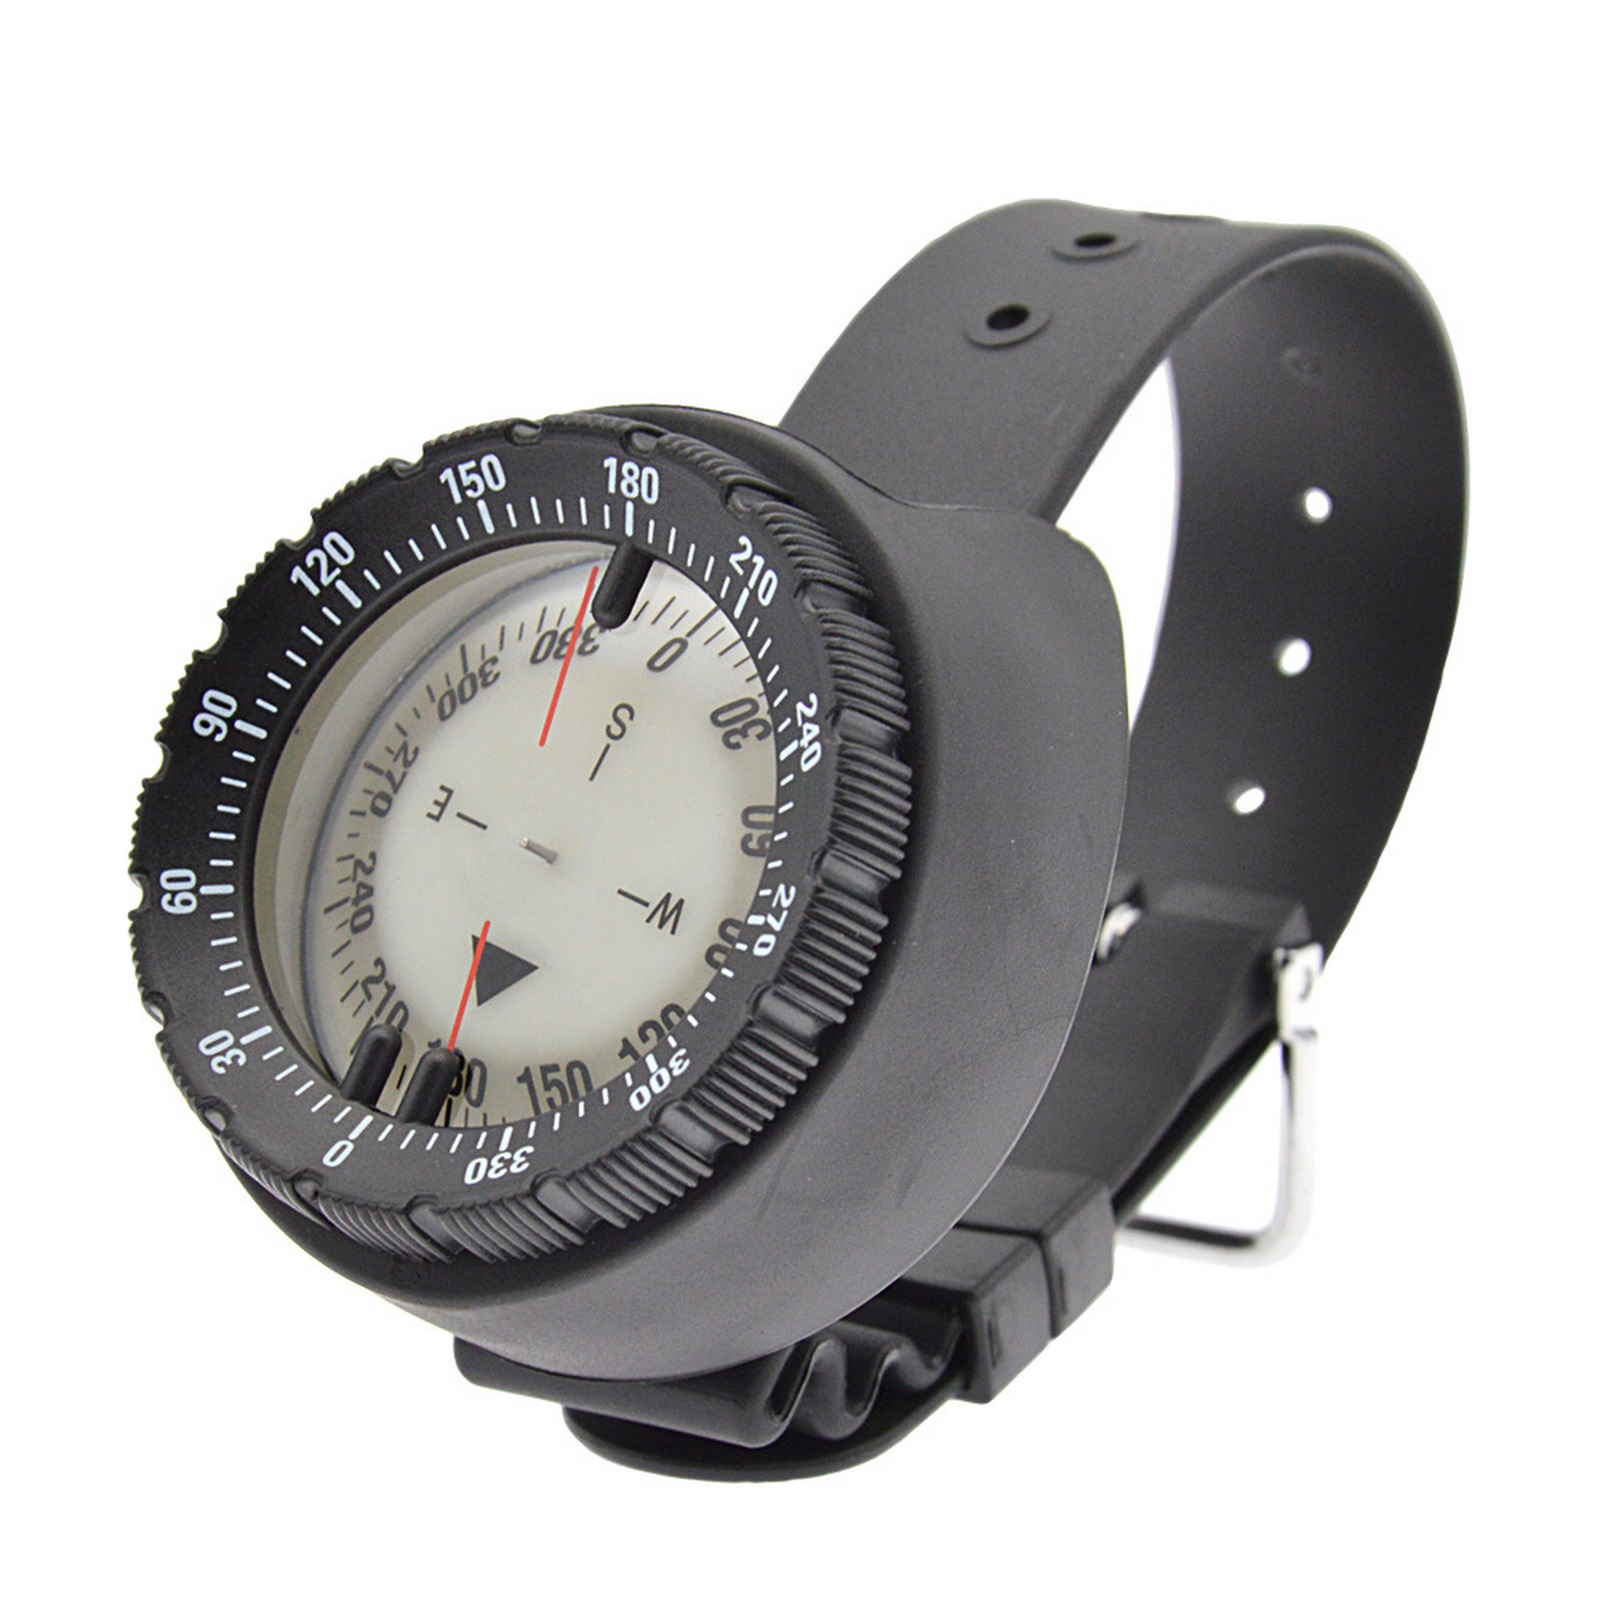 Details about   Waterproof Wrist Mount Dive Compass for Scuba Underwater Gauge with Night Vision 